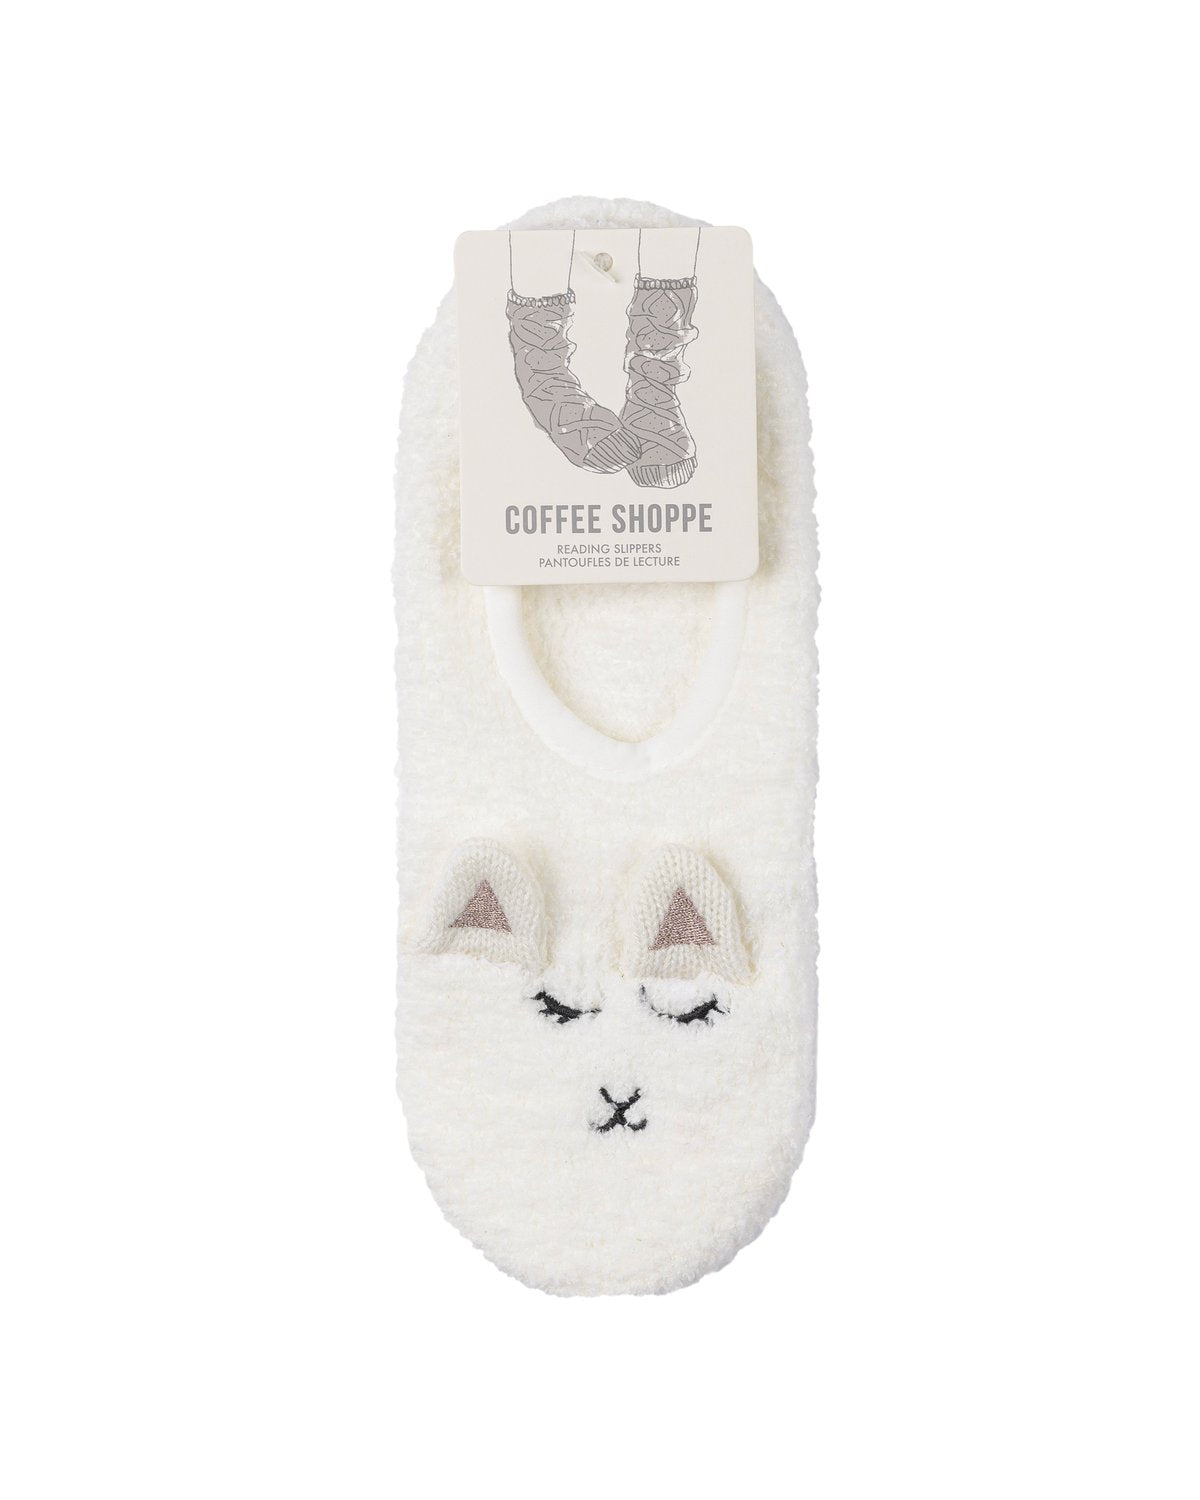 Coffee Shoppe Marshmallow Critter Footlet Slippers - Lamb